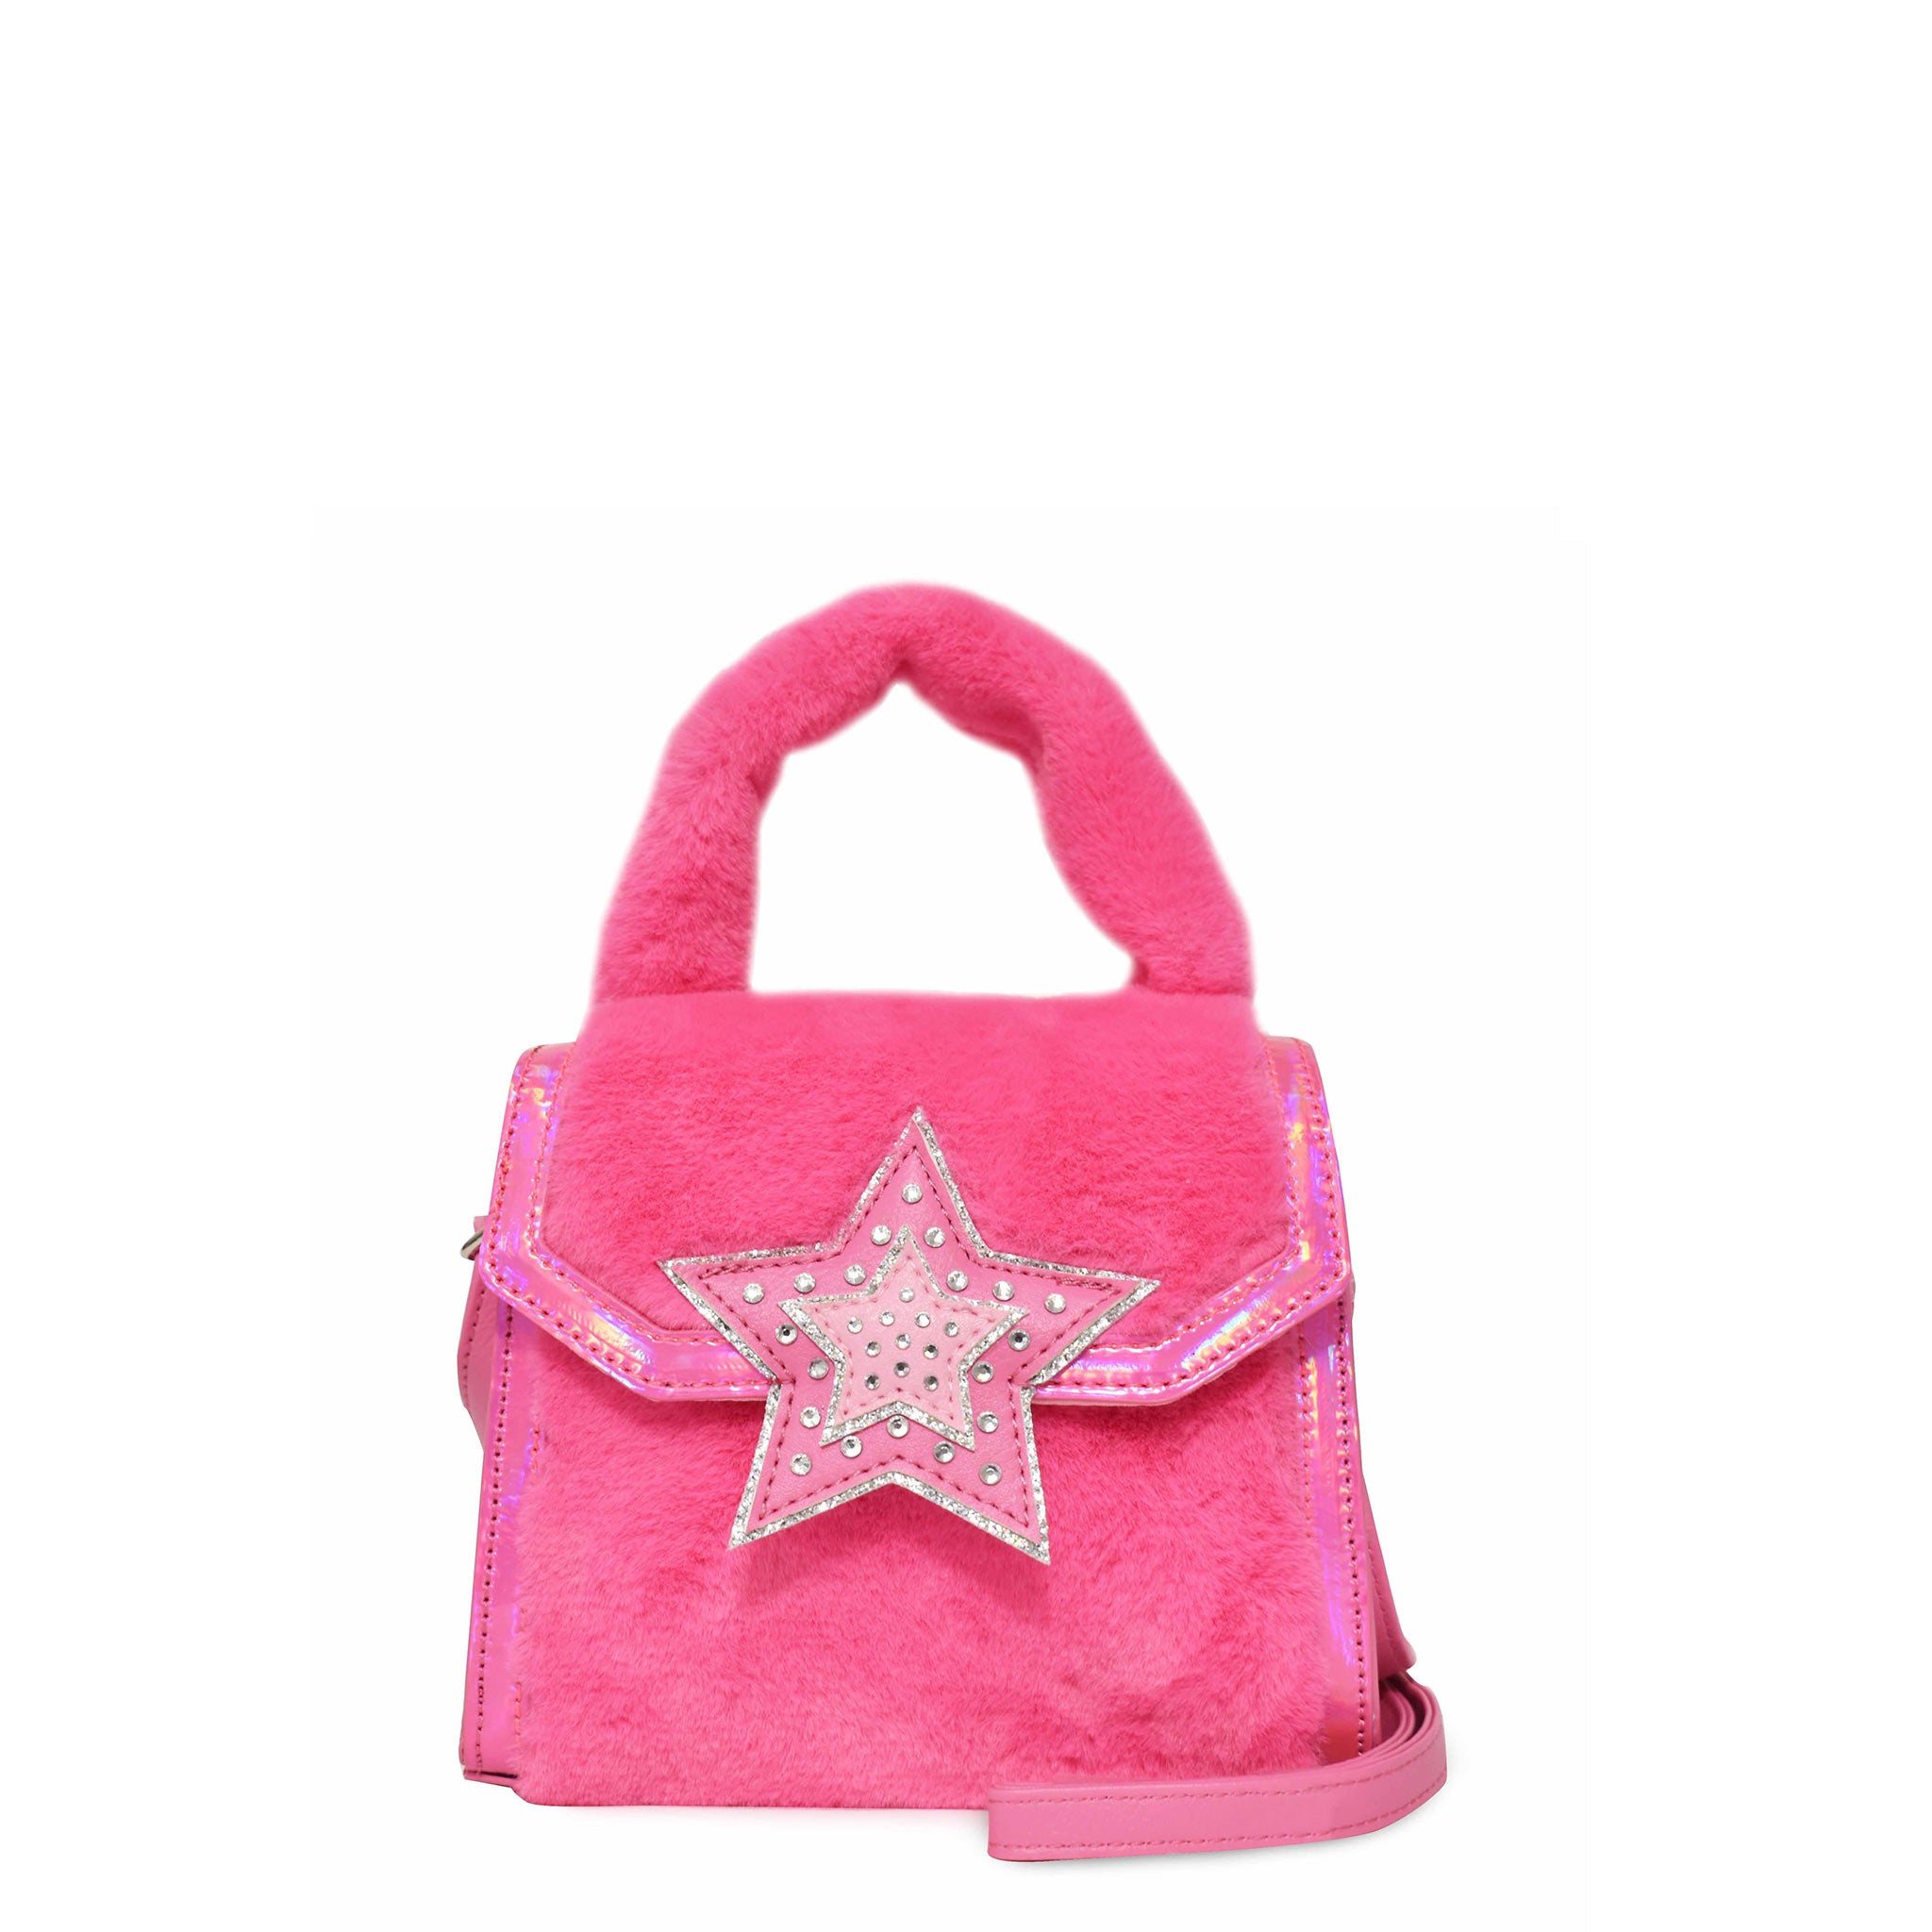 Front view of a hot pink plush top handle crossbody with rhinestone star appliqué on flap closure.